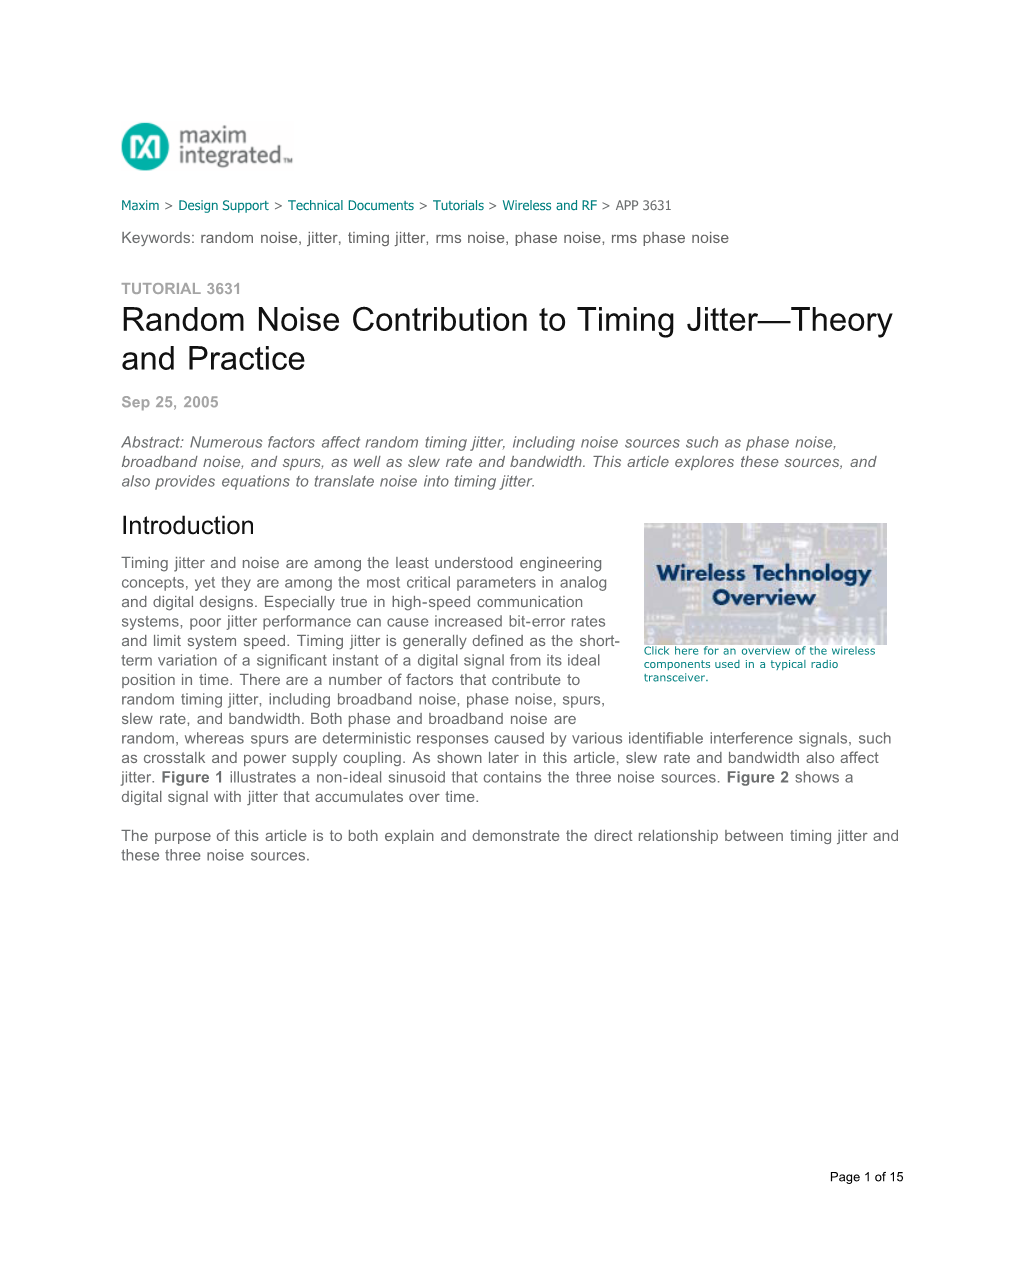 Random Noise Contribution to Timing Jitter—Theory and Practice